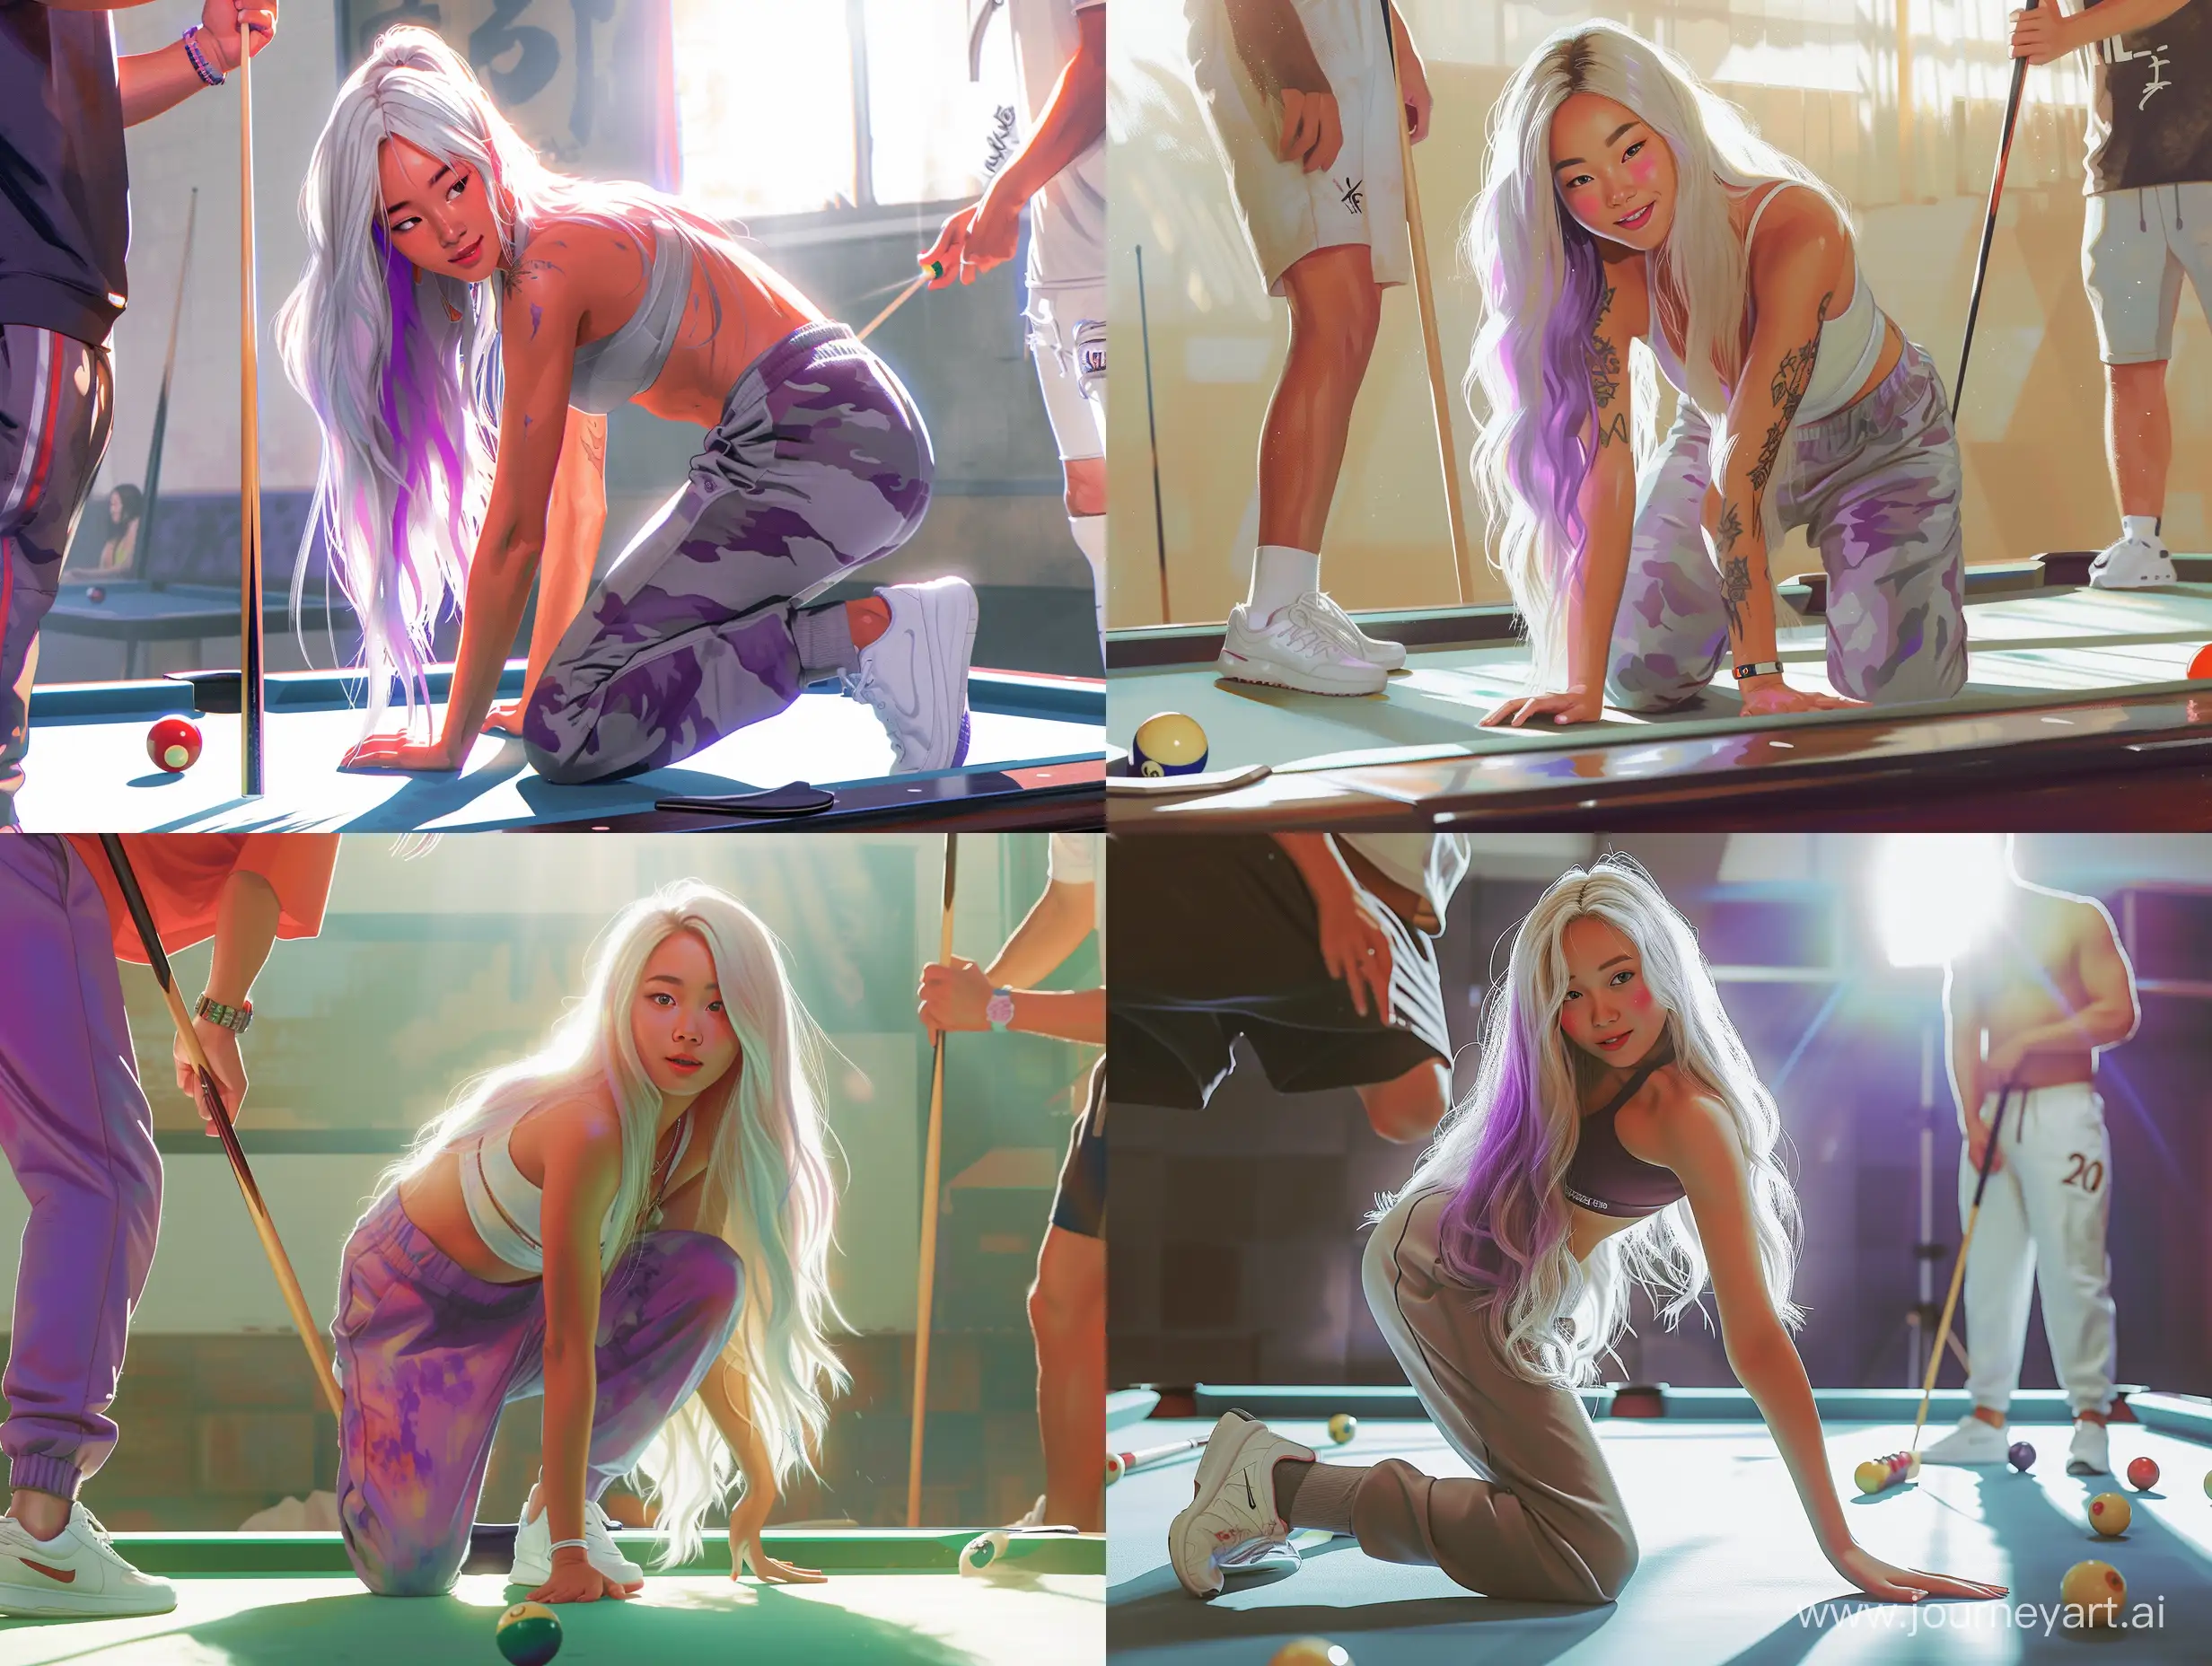 created for me a realistic image of an Asian girl, 20 years old,, toned skin, rosy cheeks, long white hair mixed with purple, yoga pants, white sneakers, her bending over the table to play billiards in the club space, opposite her is her playing partner holding a stick and observing her, bright light